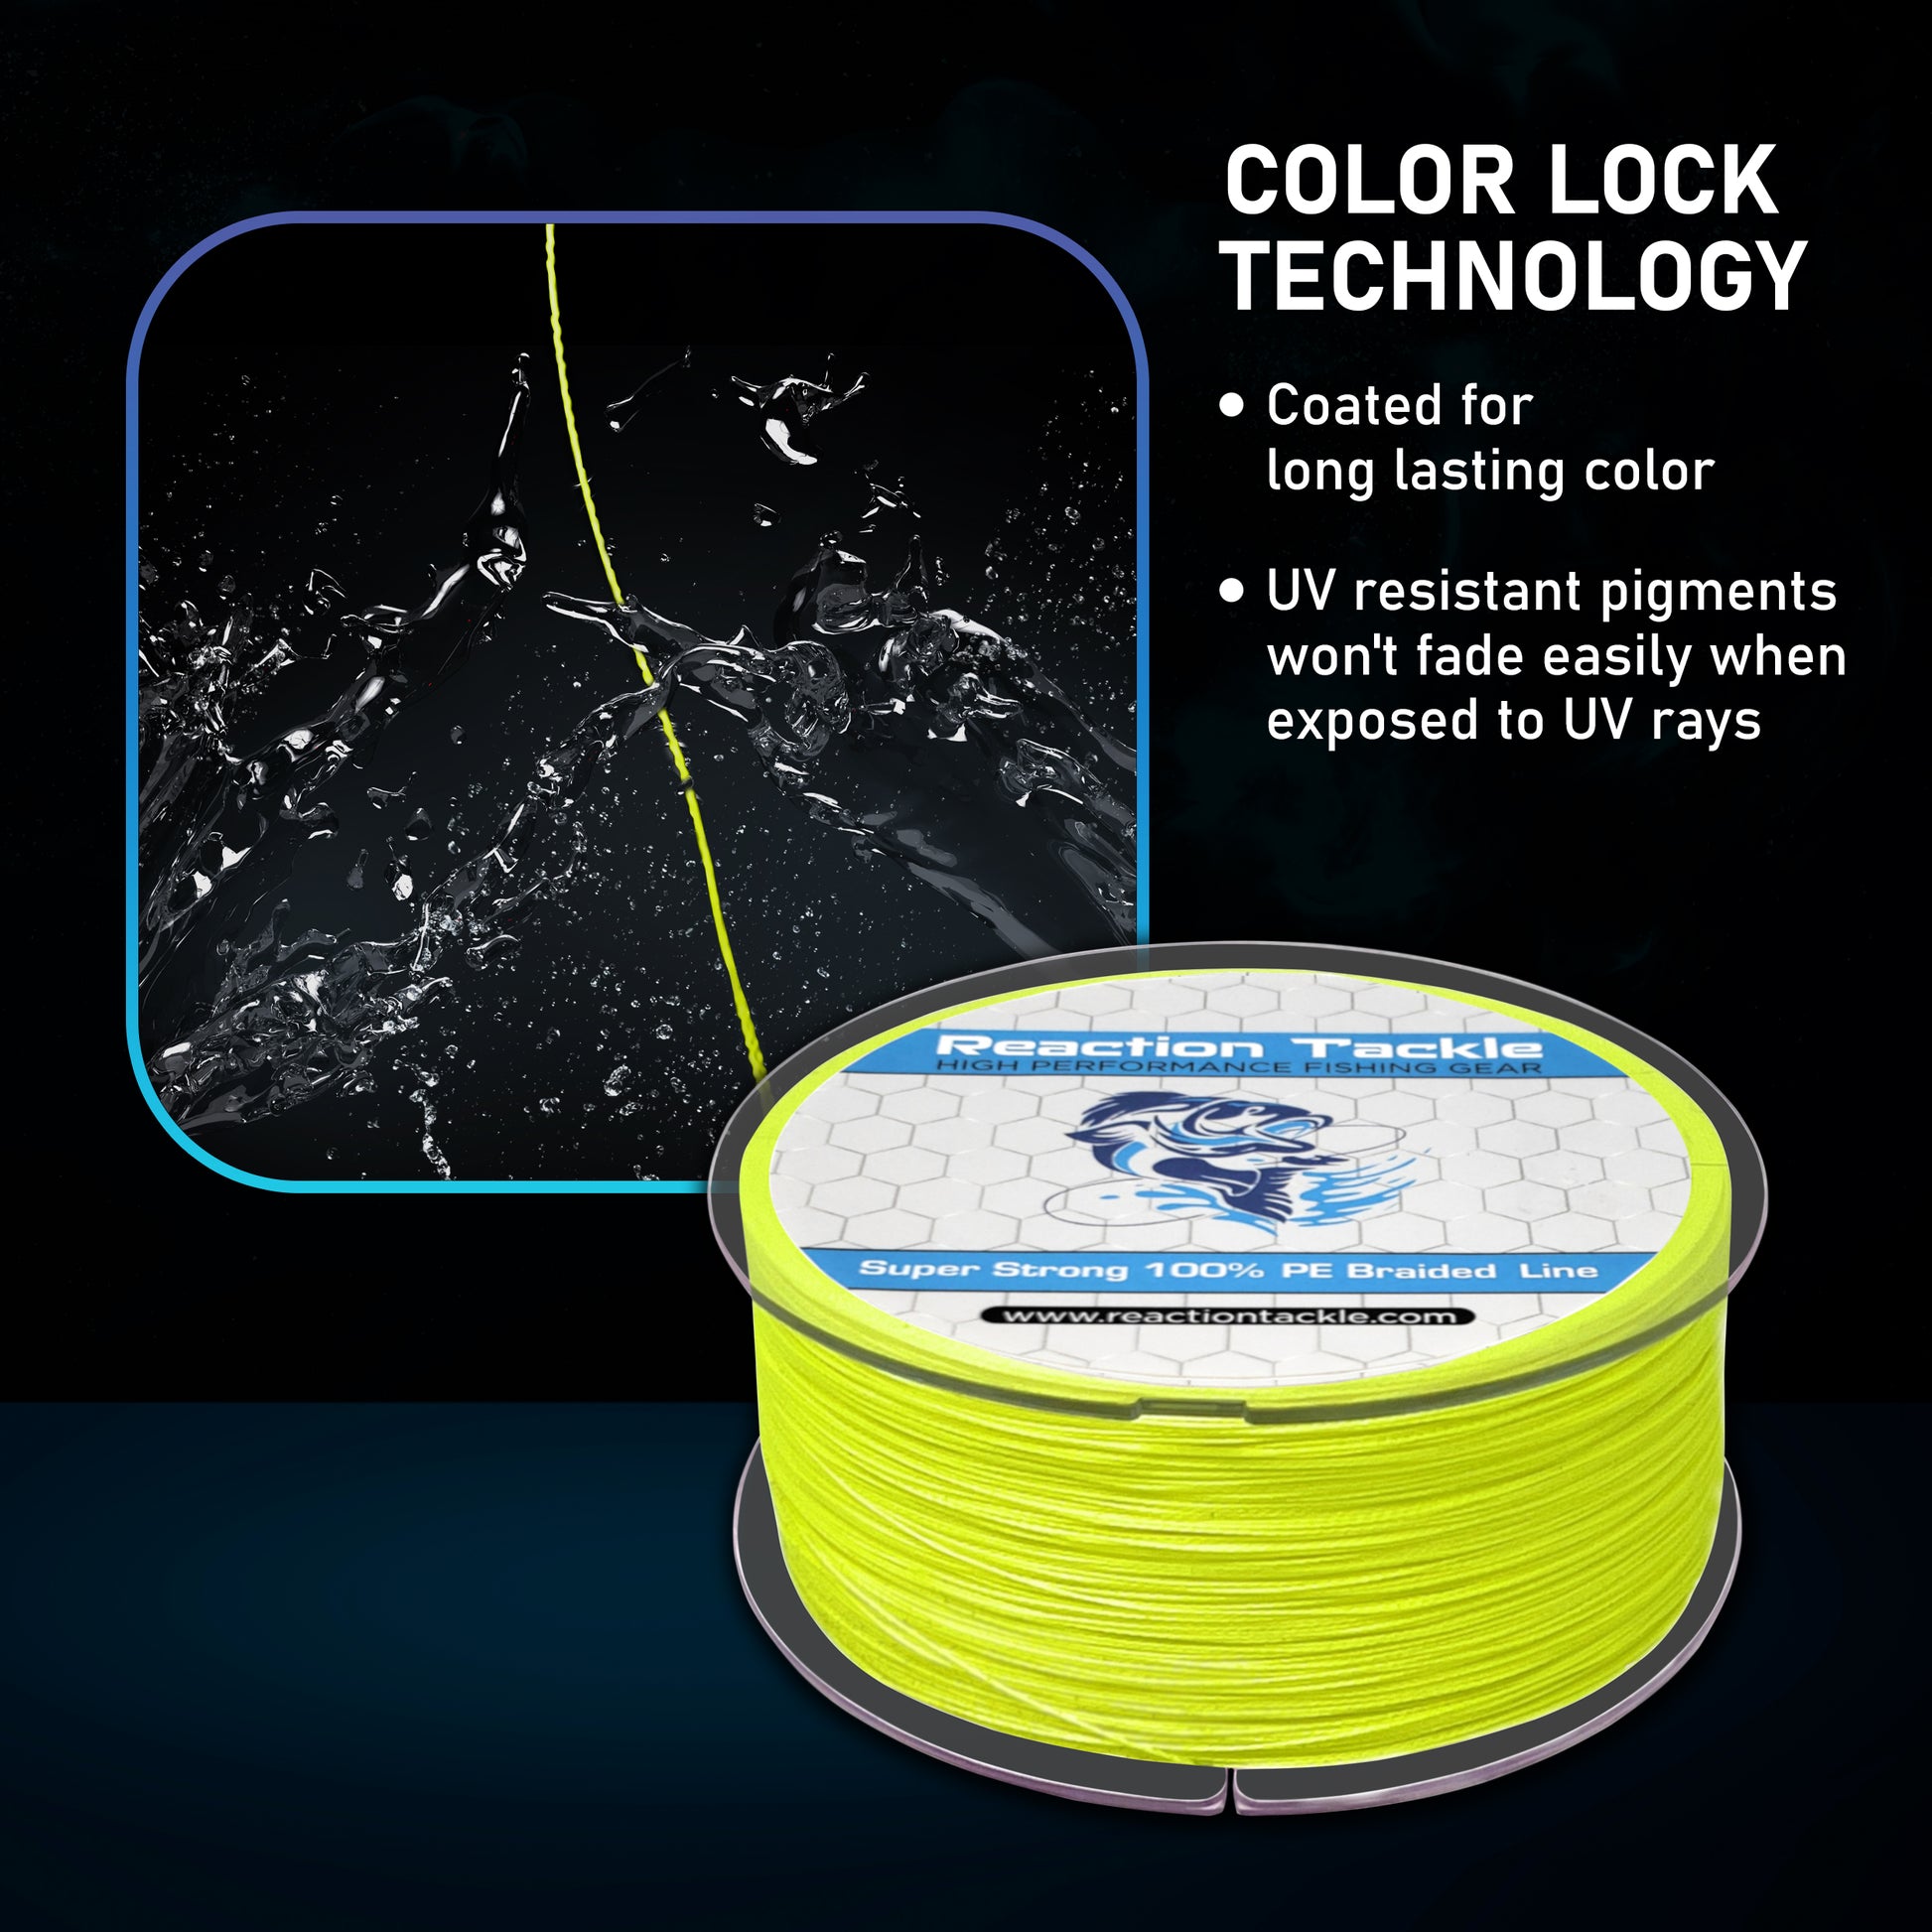 Reaction Tackle Braided Fishing Line - Pro Grade Power Performance